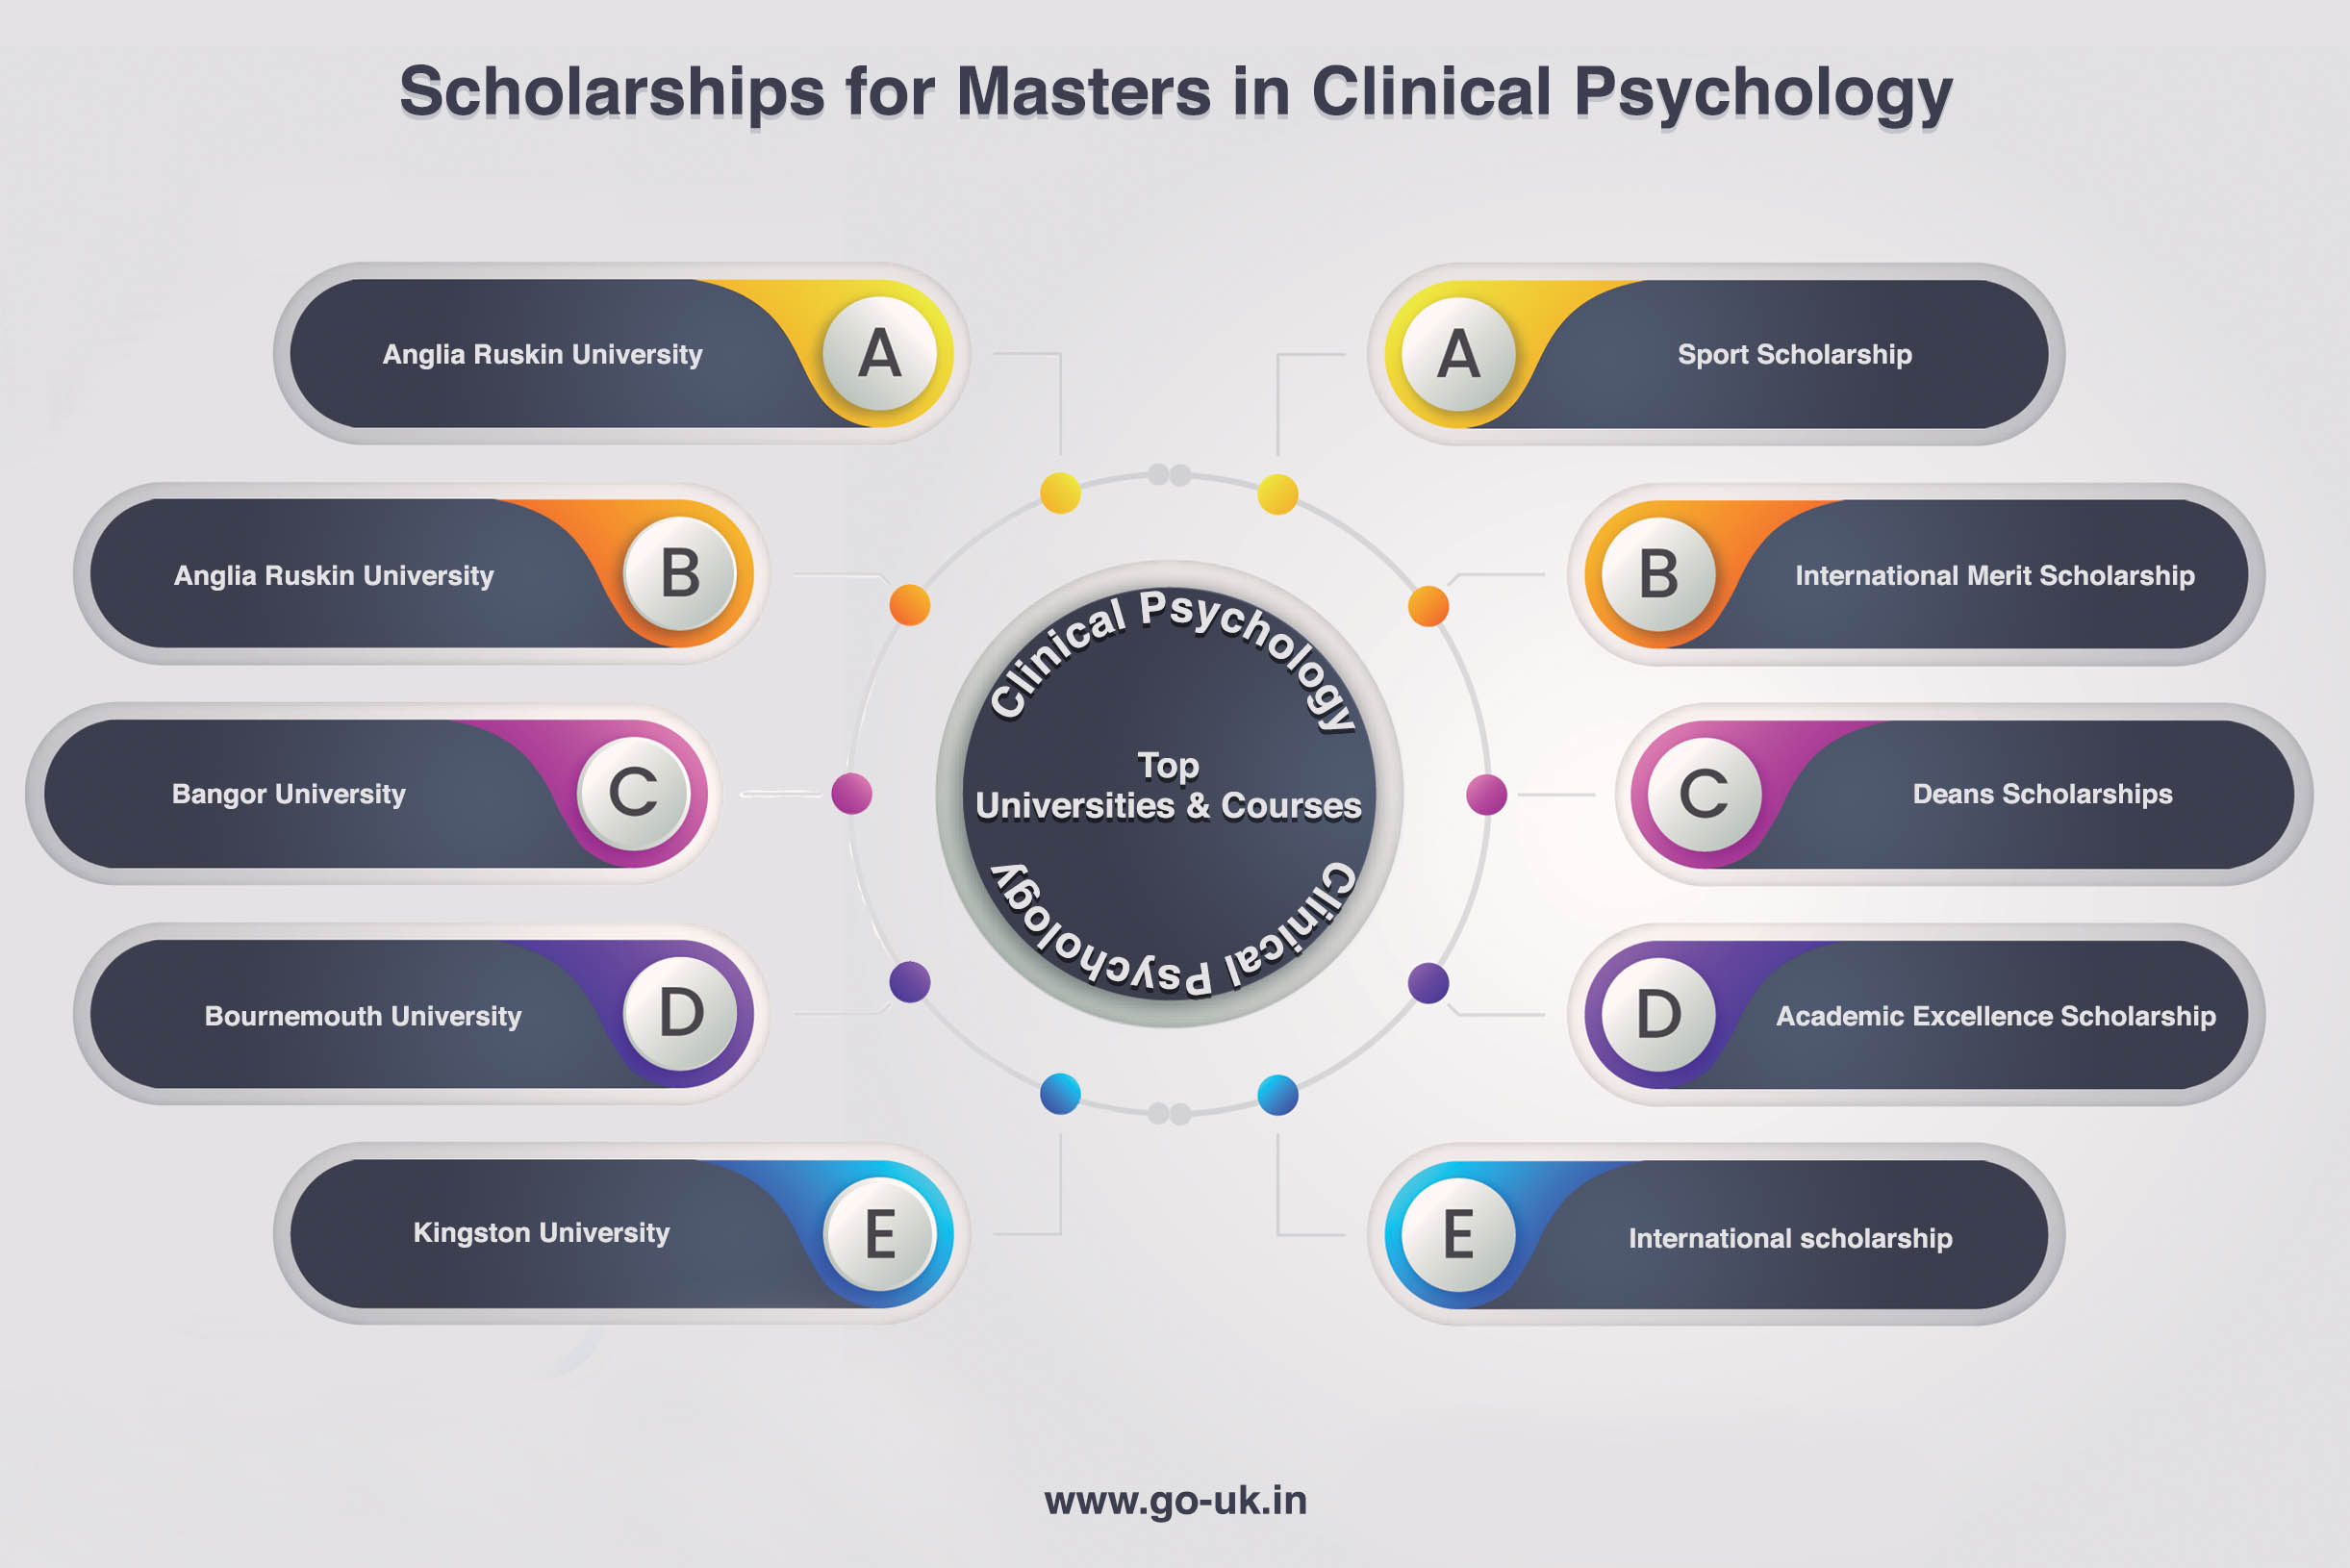 Scholarships for Masters in Clinical Psychology